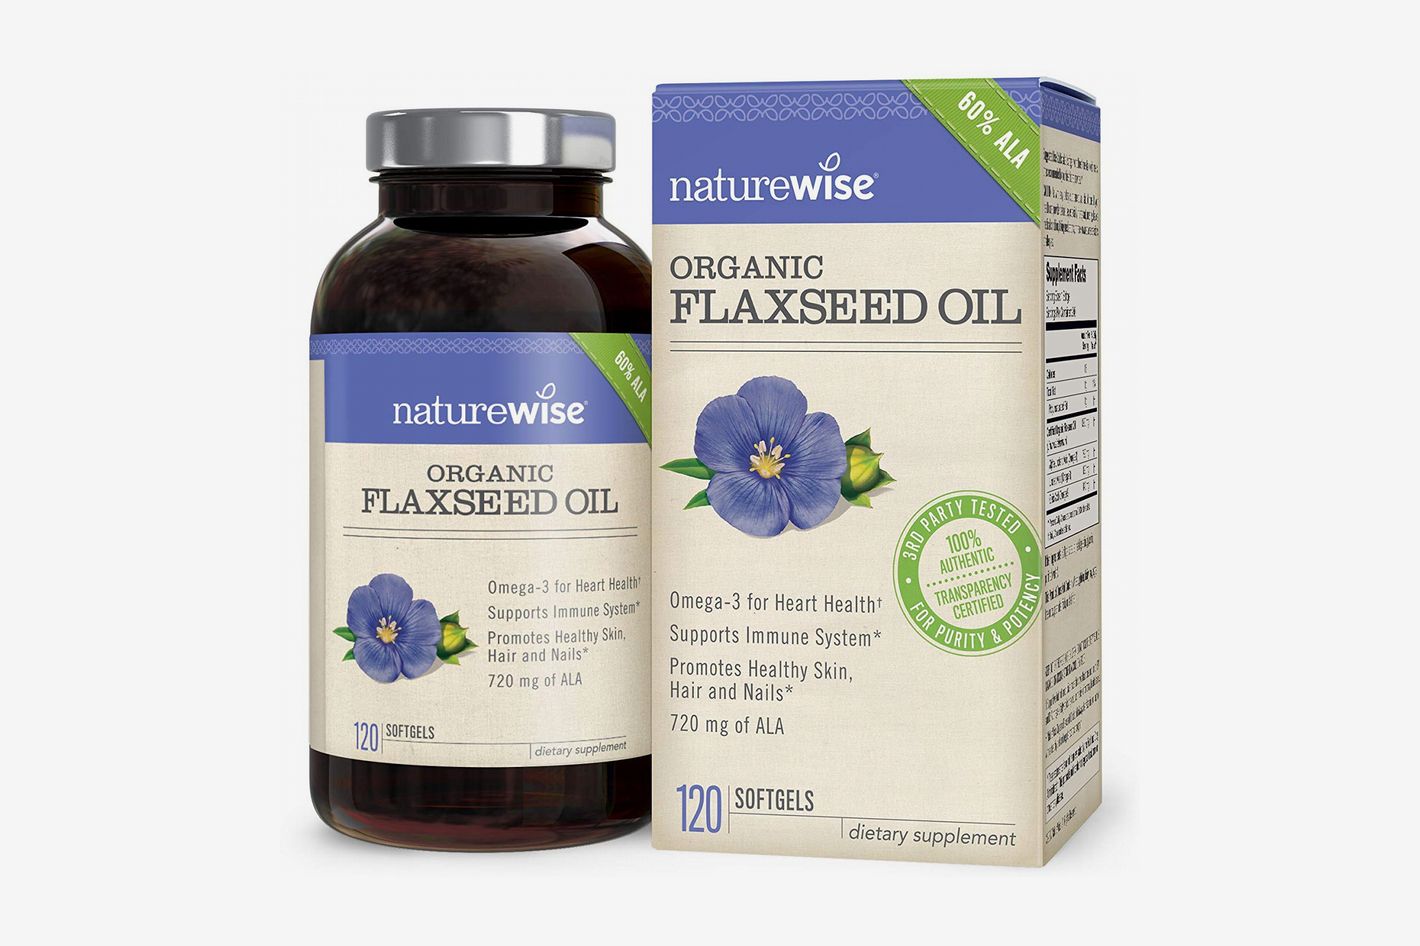 Naturewise Organic Flaxseed Oil Supplements